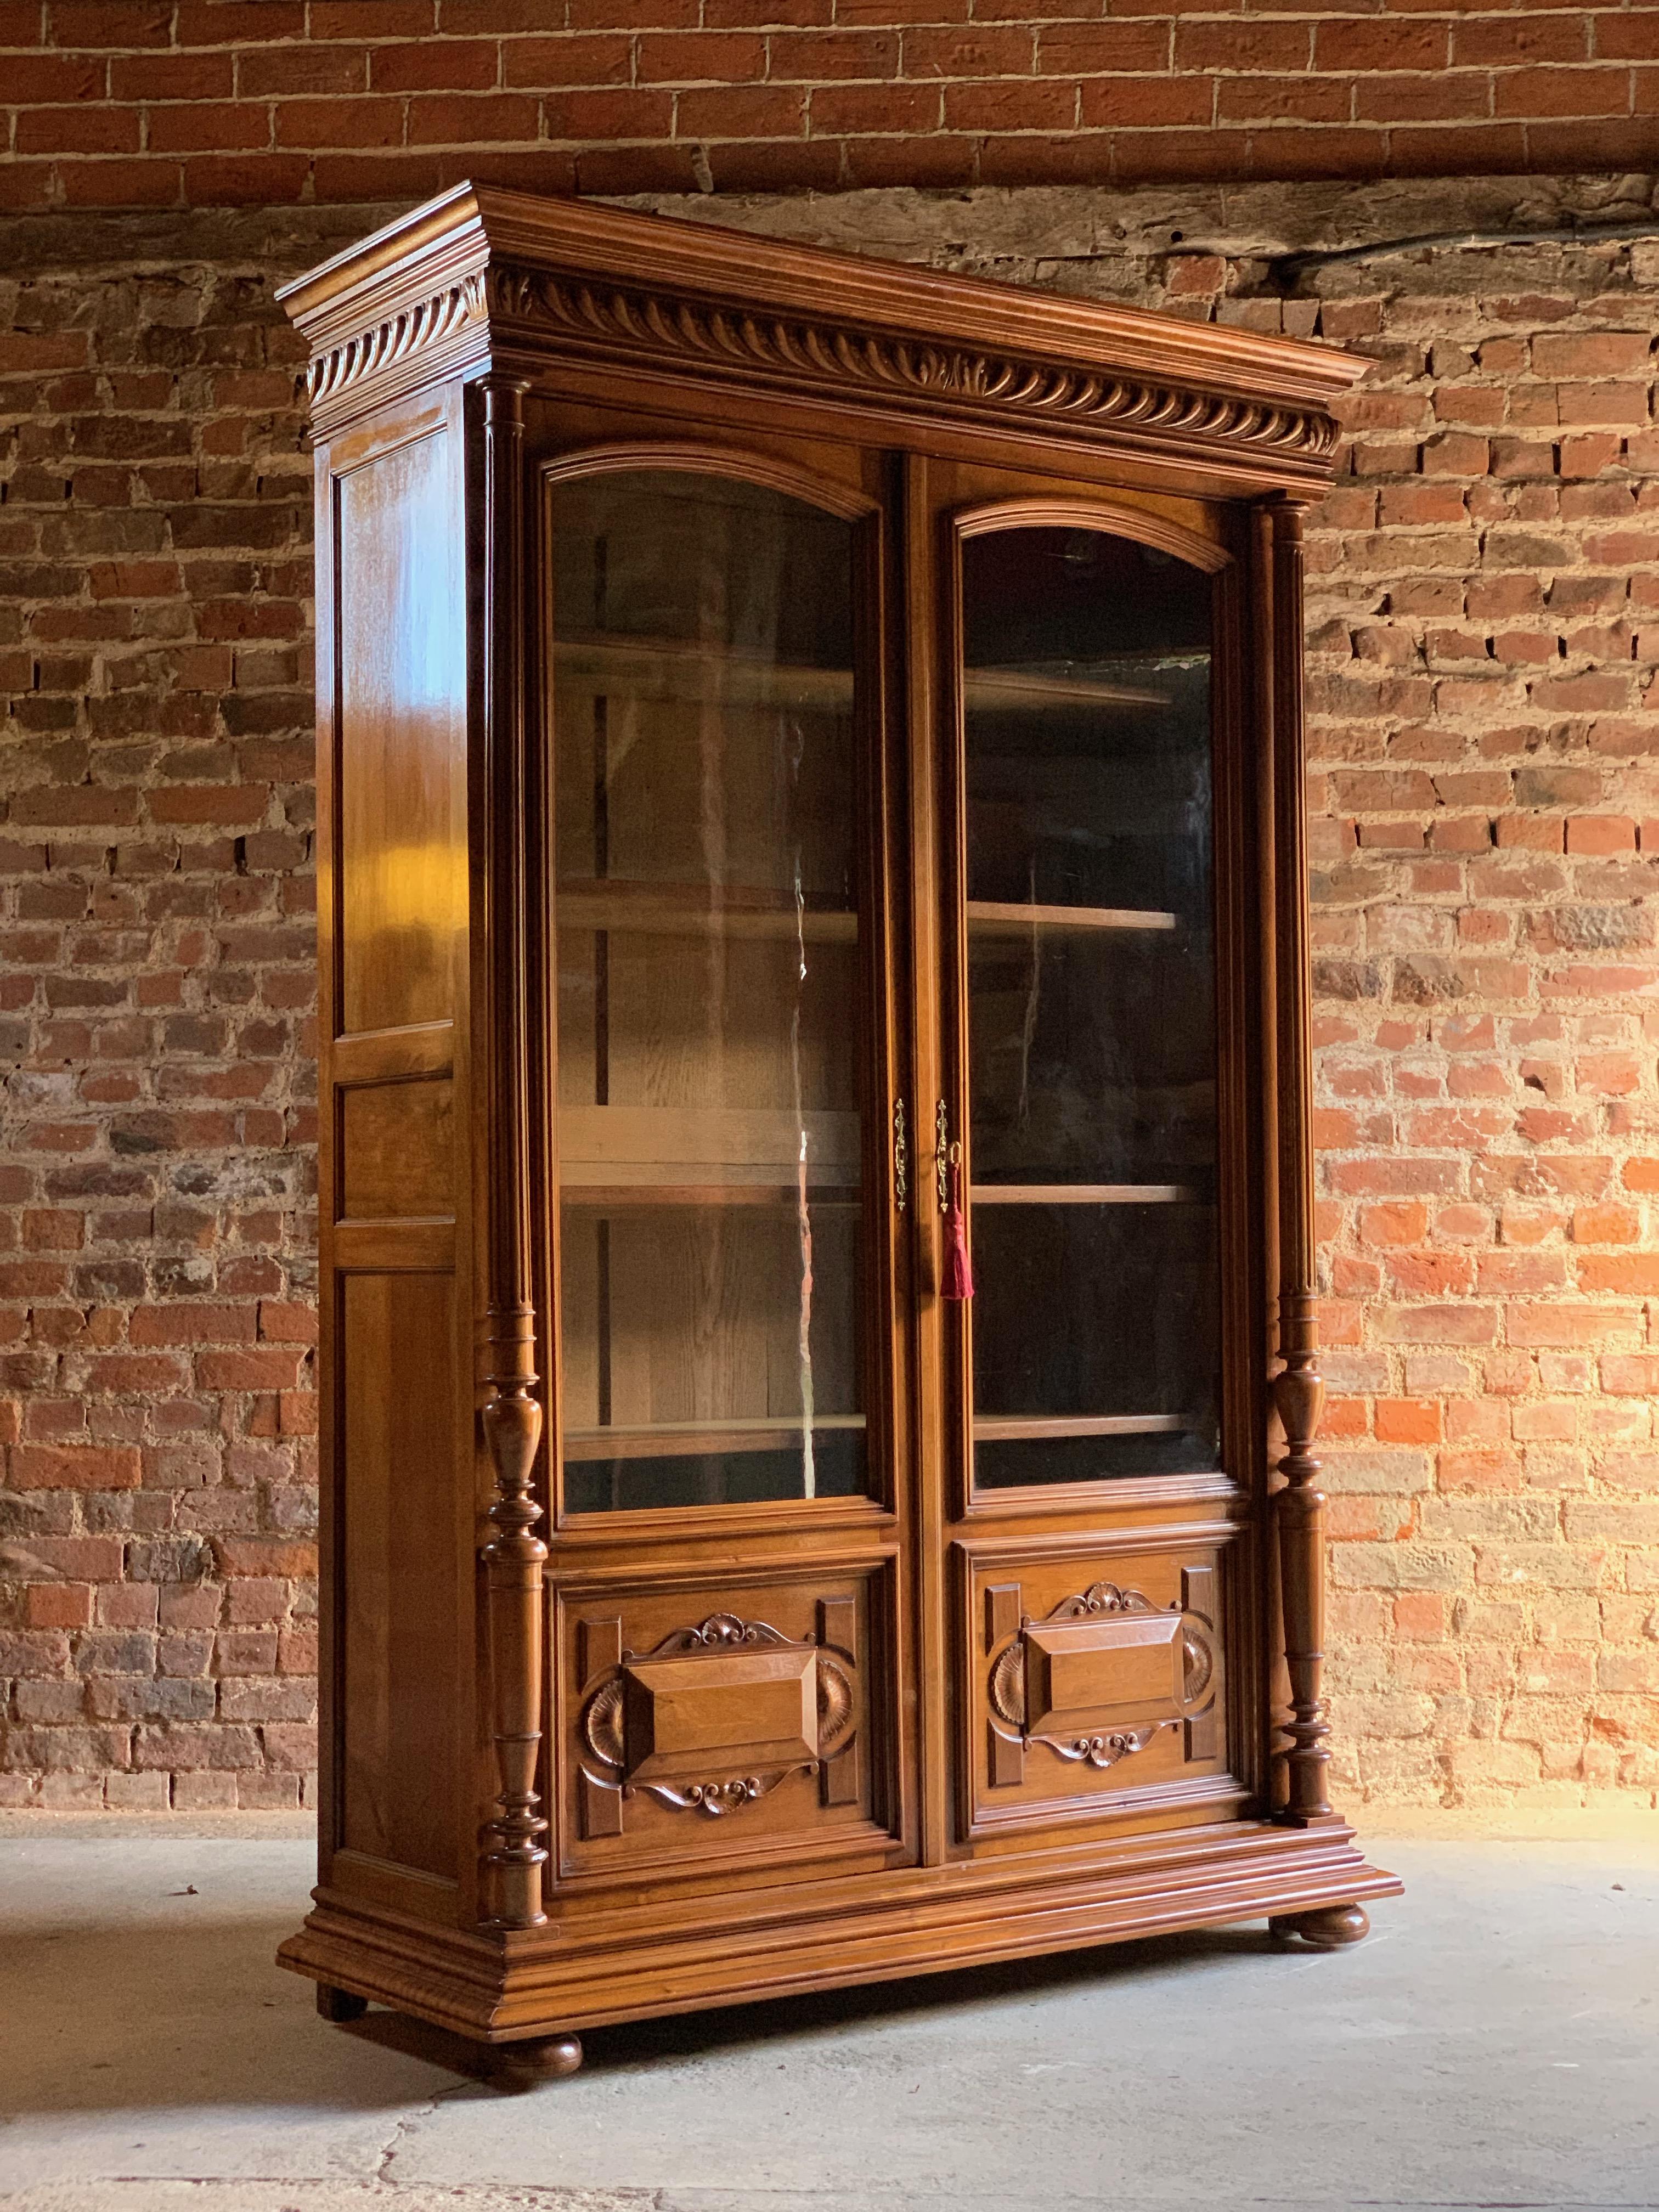 Fabulous antique 19th century French solid walnut bookcase vitrine, circa 1890 Number 3.

A fabulous tall and elegant 19th century French walnut two-door glazed bookcase vitrine circa 1890, the overhanging moulded carved cornice above two panelled